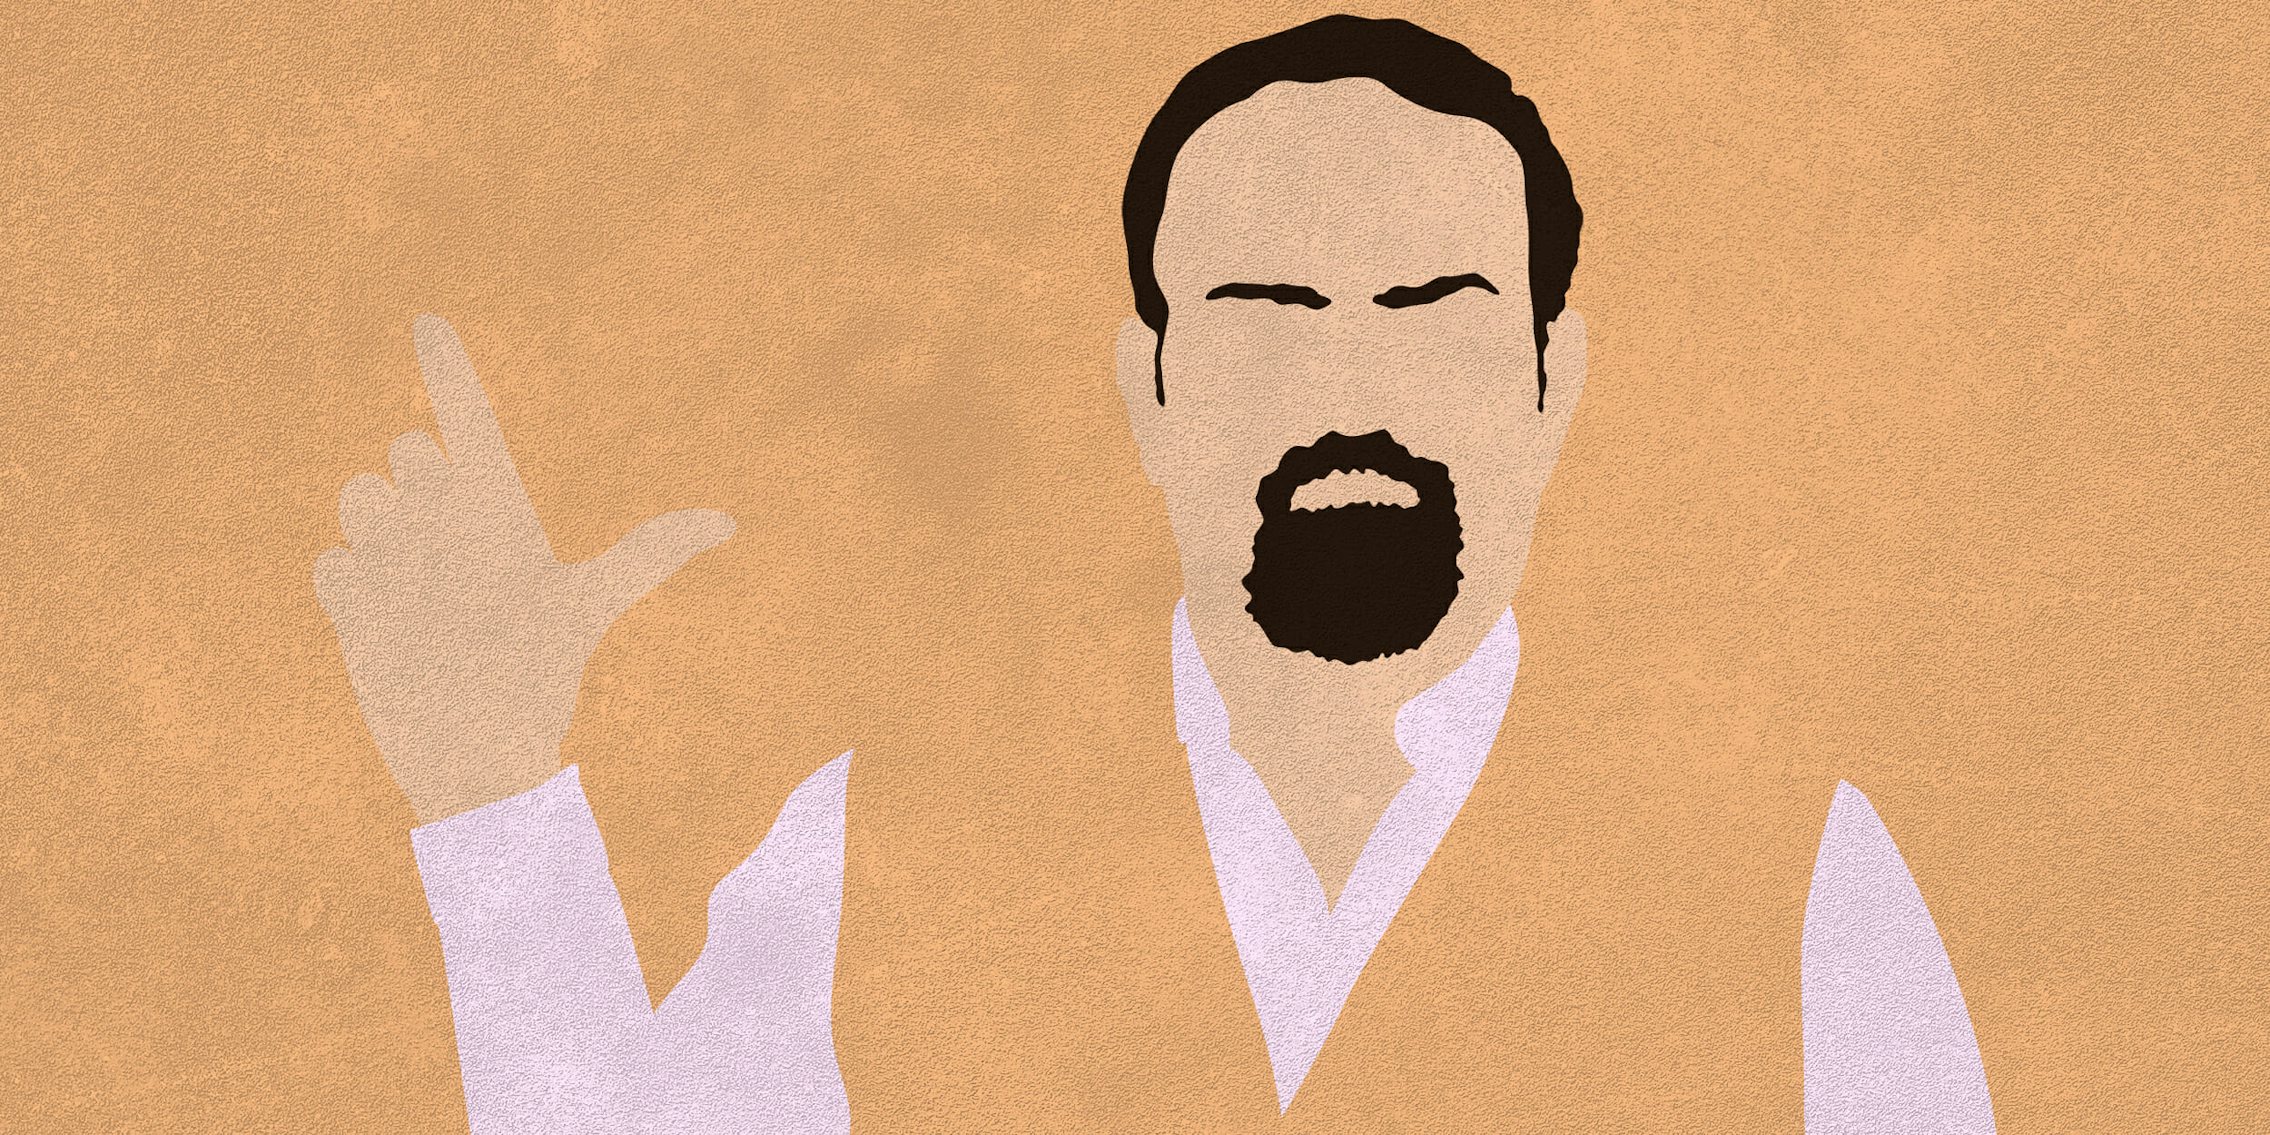 Illustration of Seb Gorka with his hand in the shape of a pistol